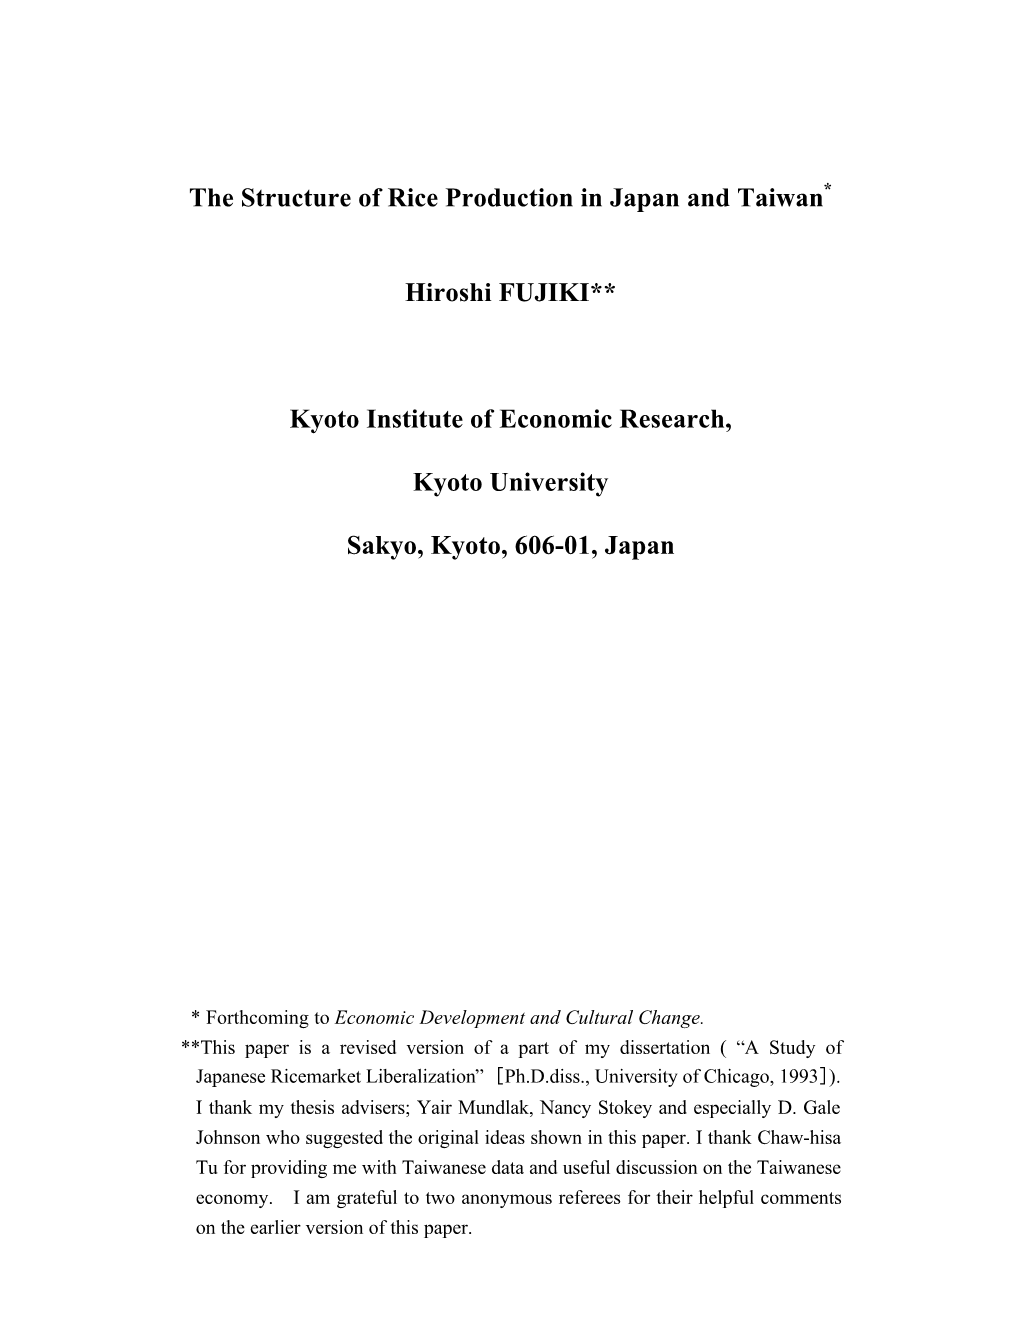 The Structure of Rice Production in Japan and Taiwan Hiroshi FUJIKI** Kyoto Institute of Economic Research, Kyoto University